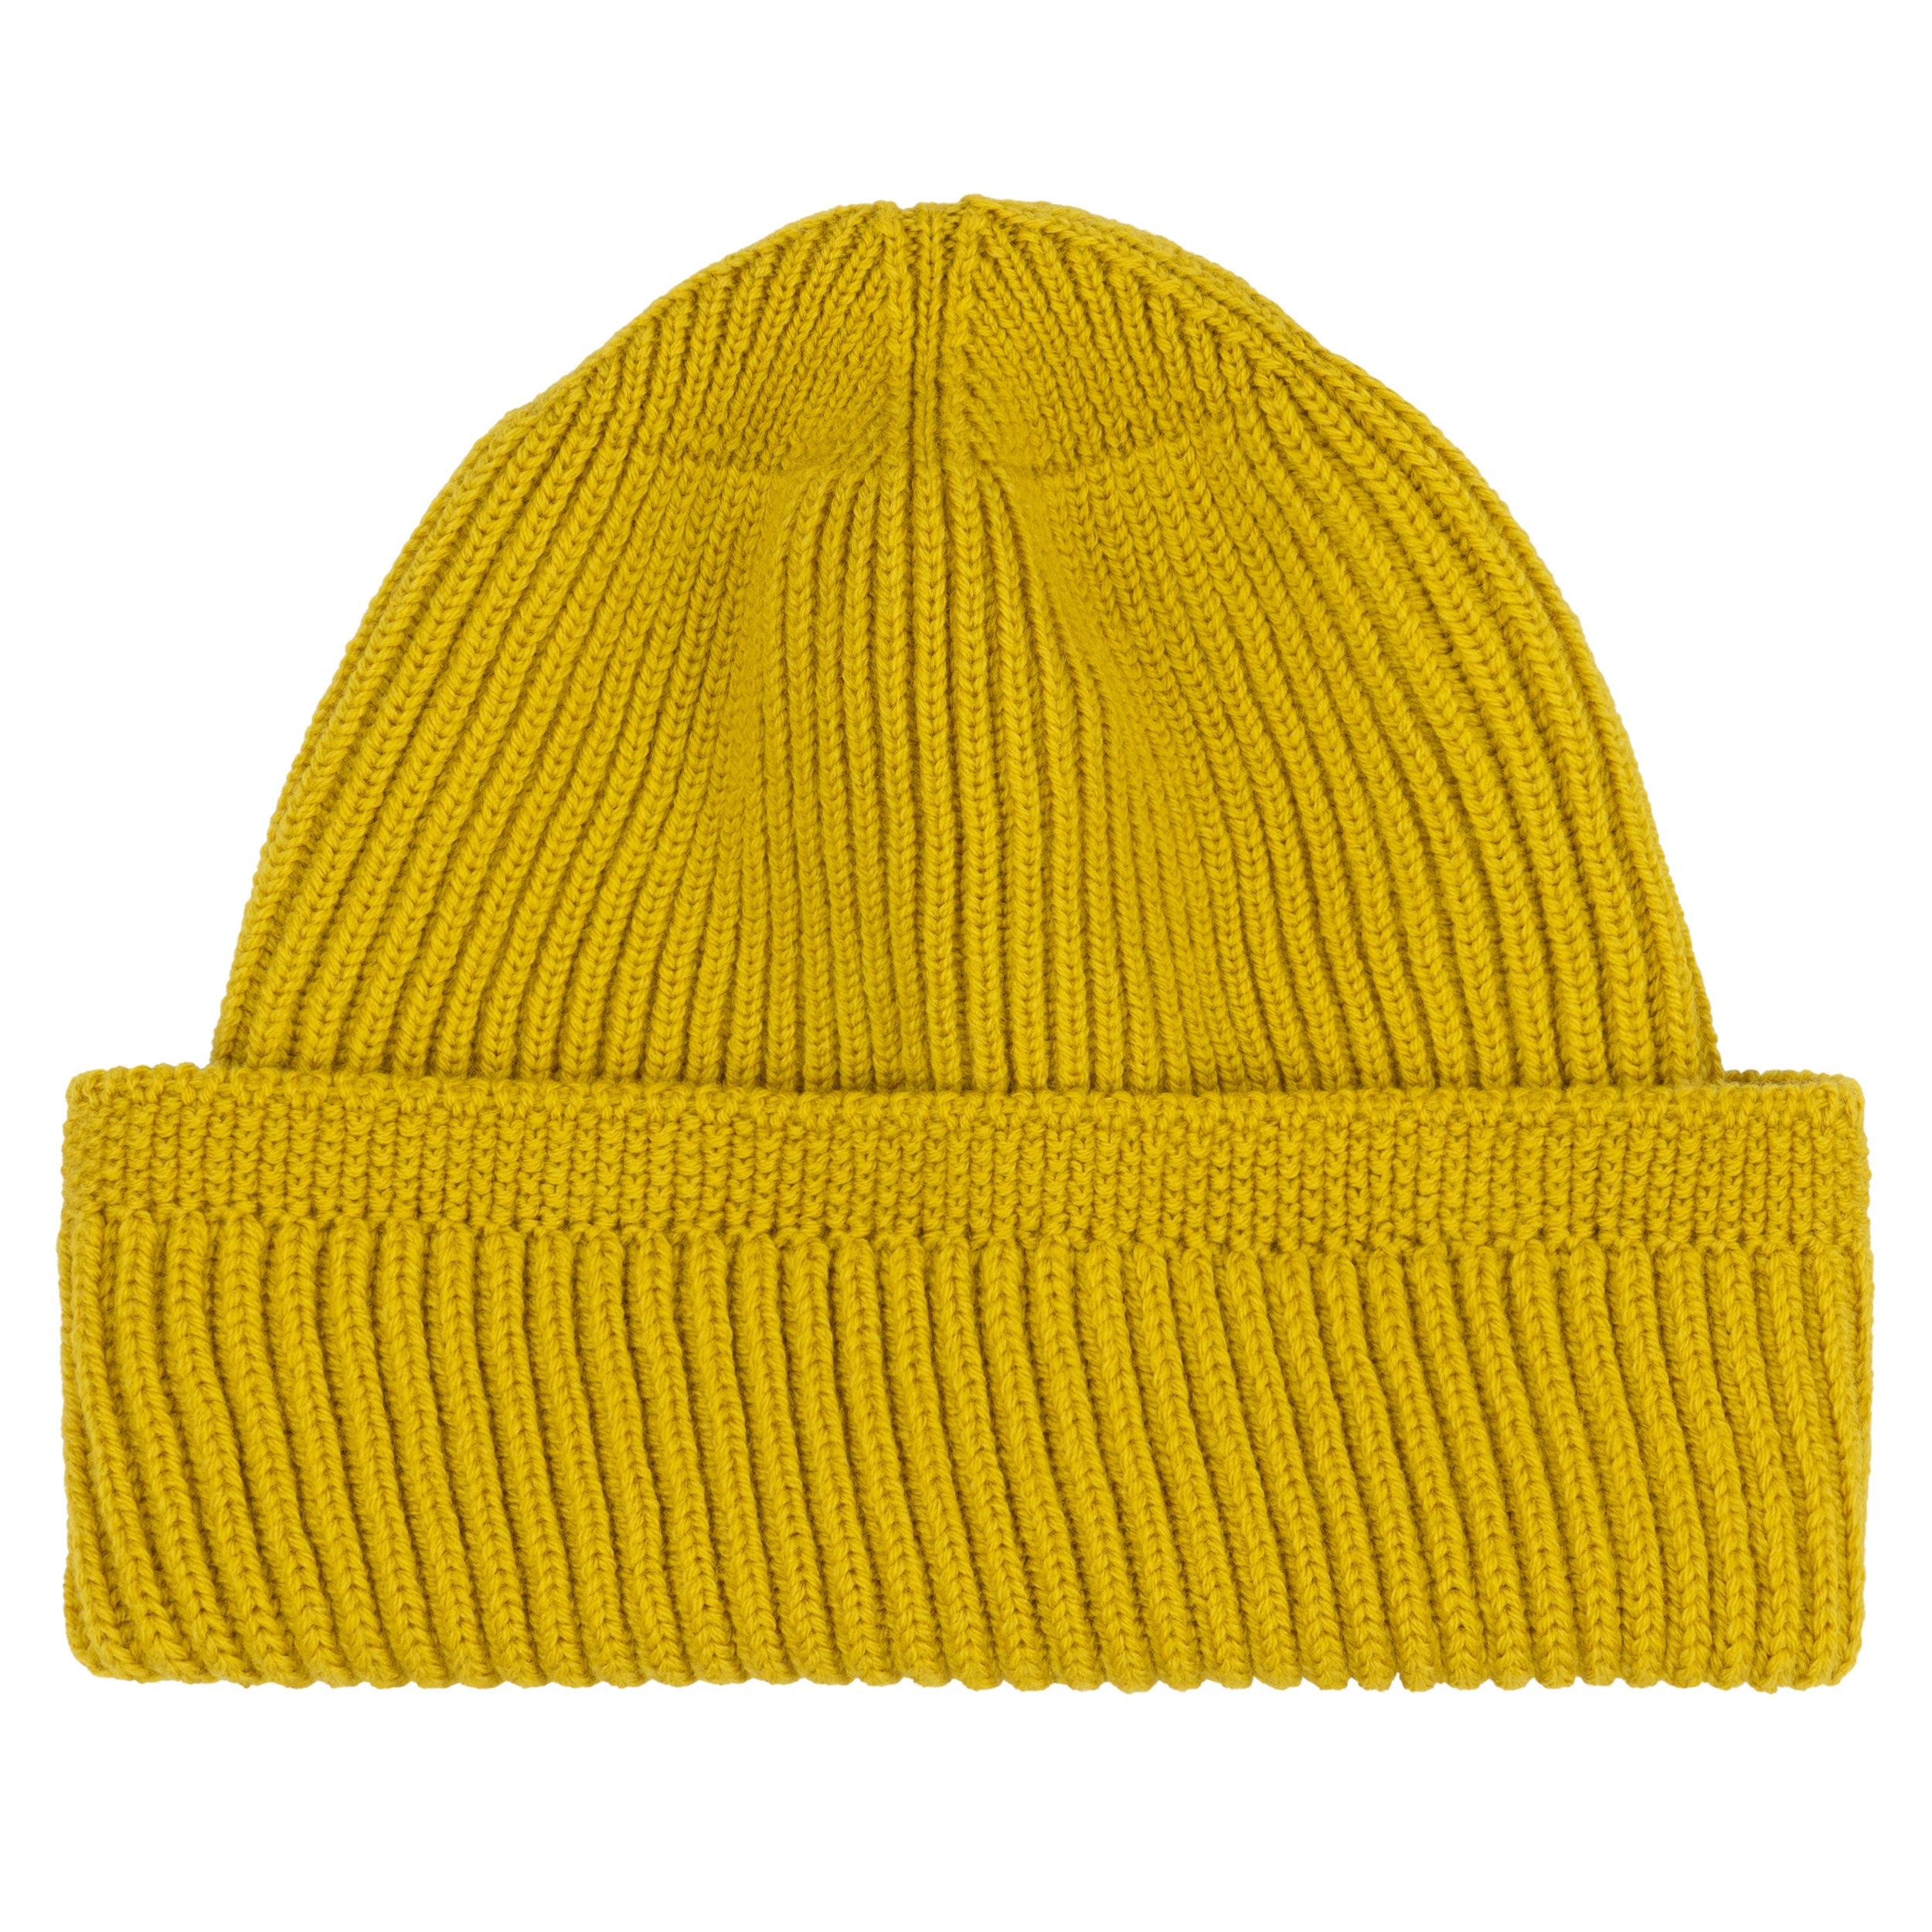 Carrier Company Wool Hat in Yellow